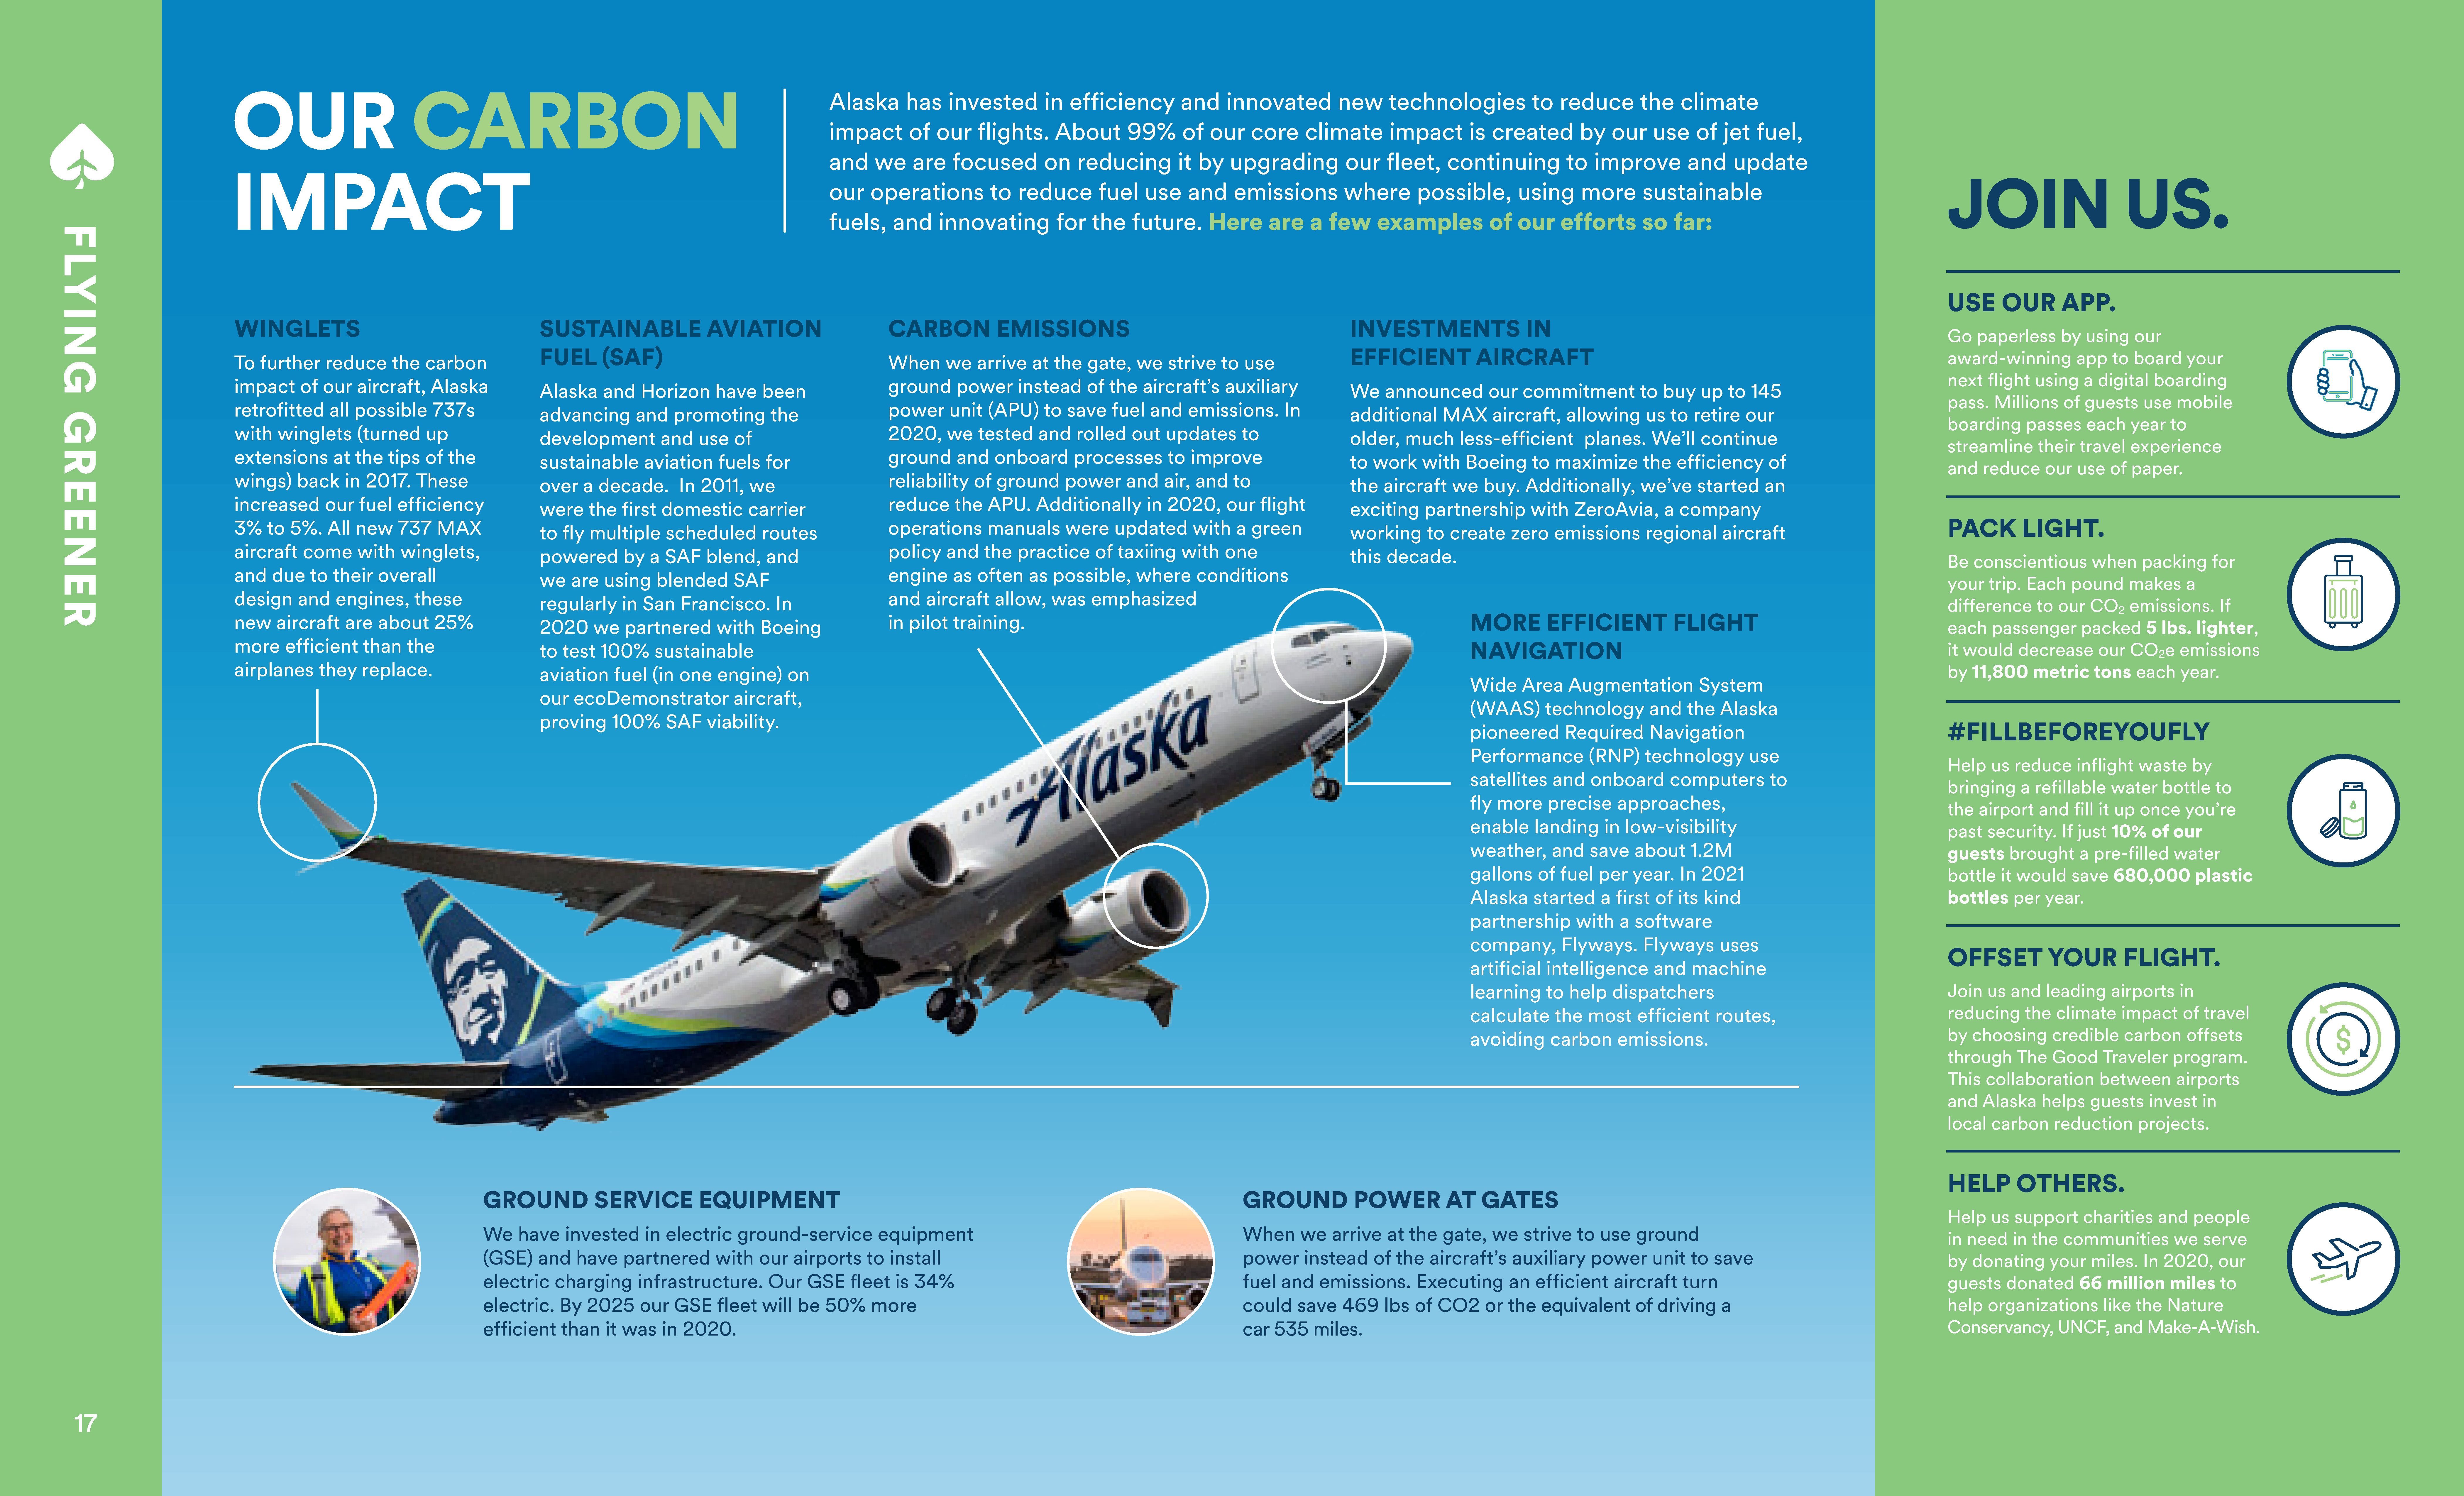 Alaska Airlines Infographic on Their Carbon Impact - Discussing Many Issues